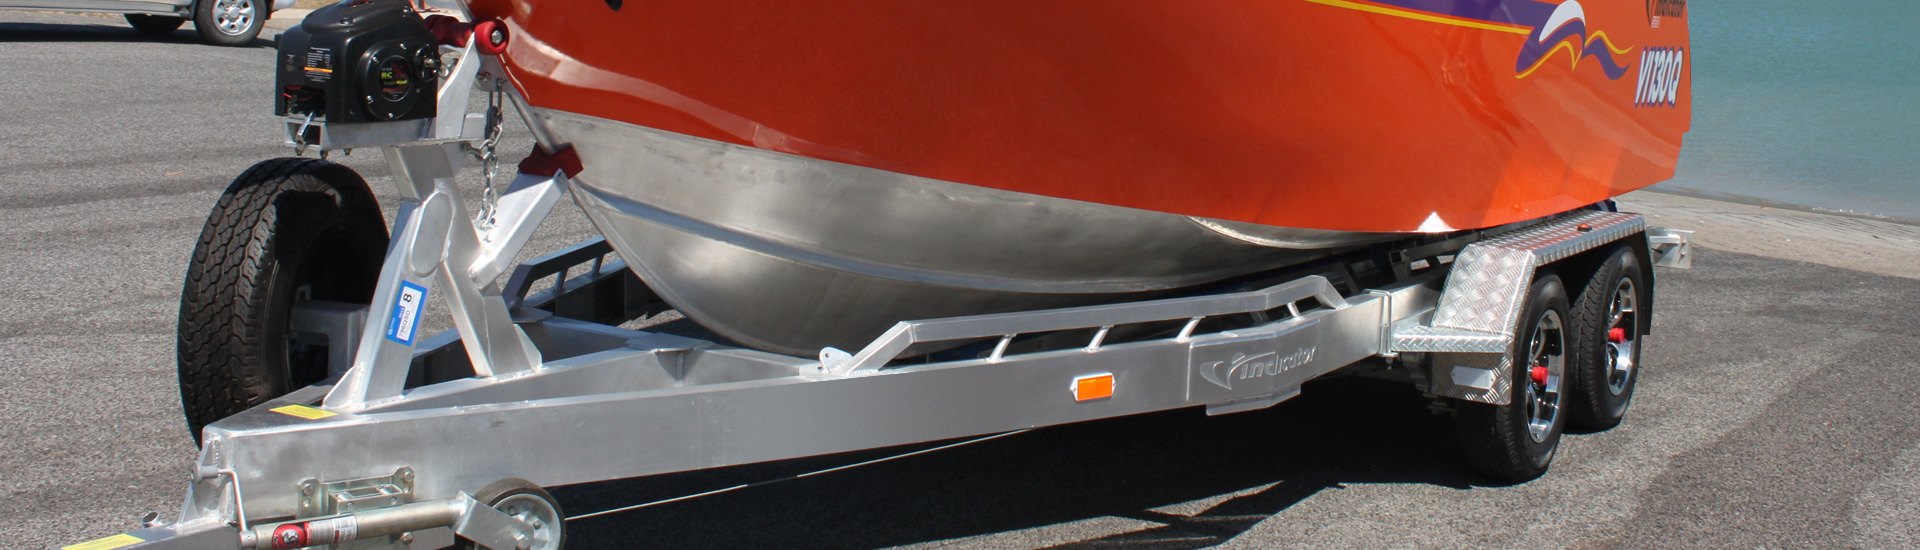 Do You Dip Your Boat Trailer In The Water? Take a Look Here